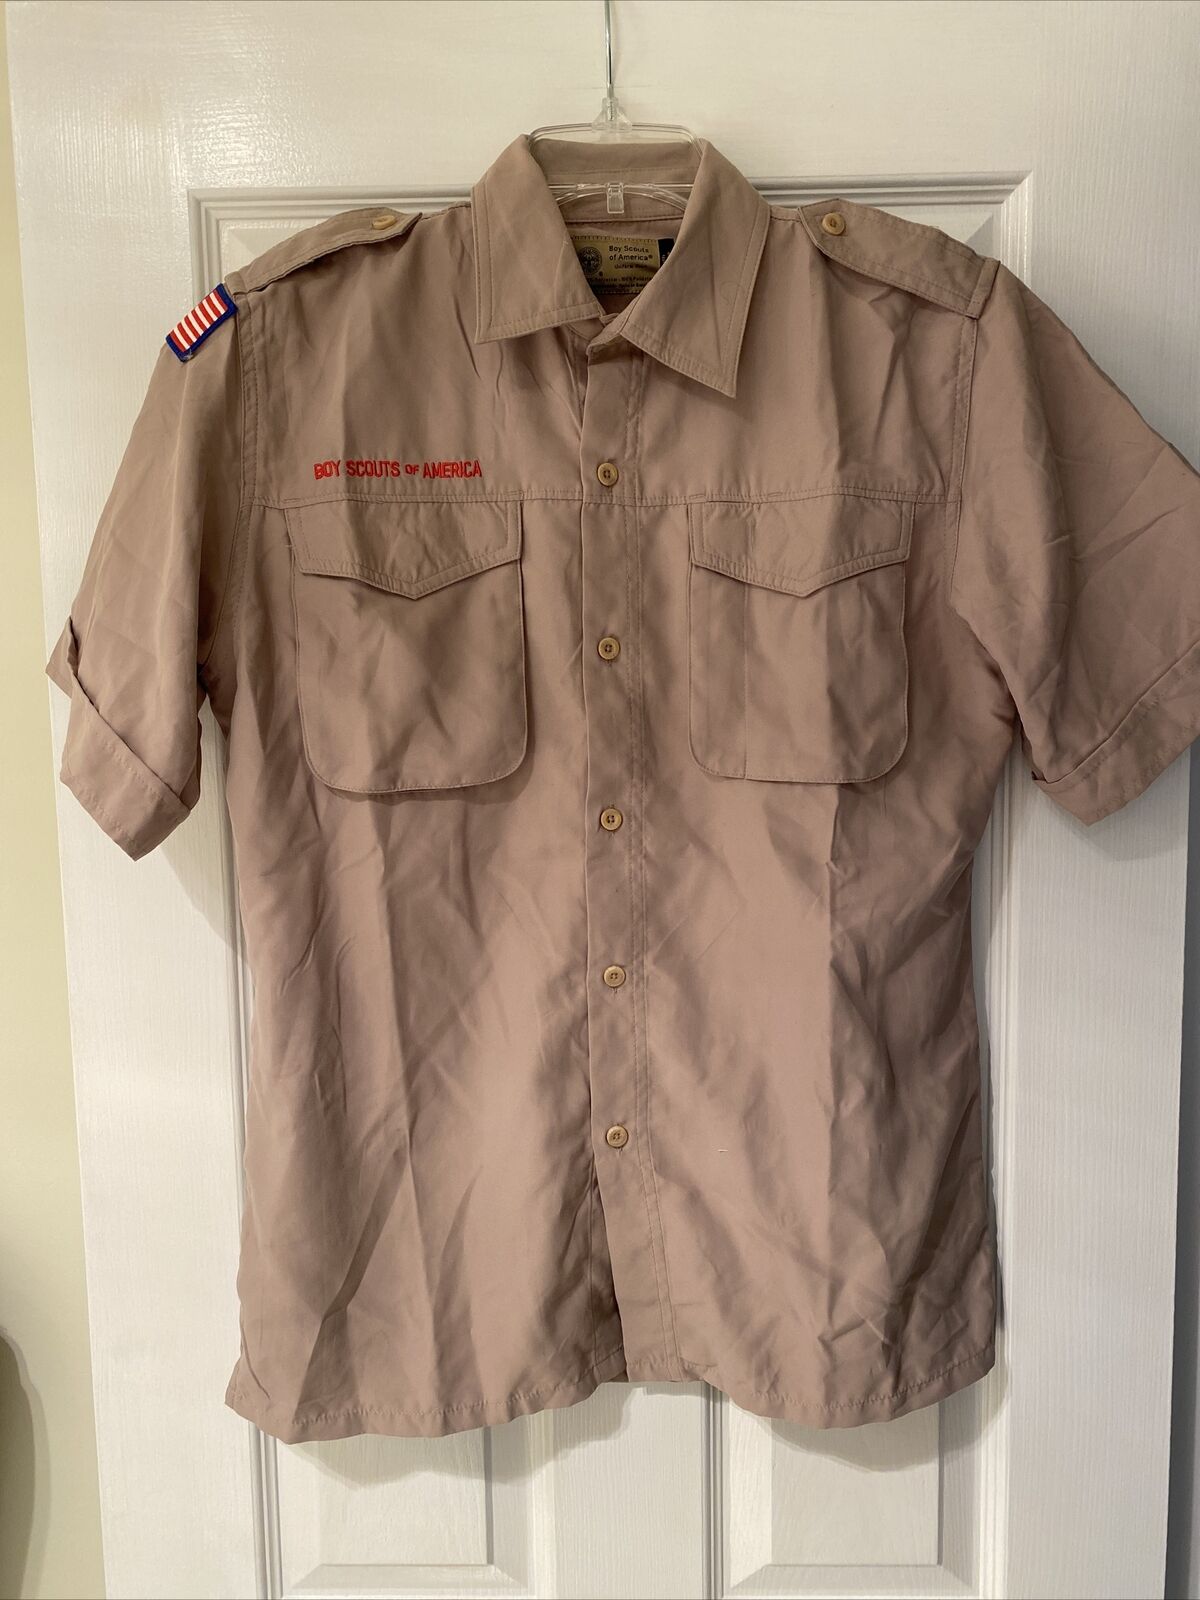 NEW Vented Microfiber Boy Scout BSA UNIFORM SHIRT Youth Extra Large XL Poly